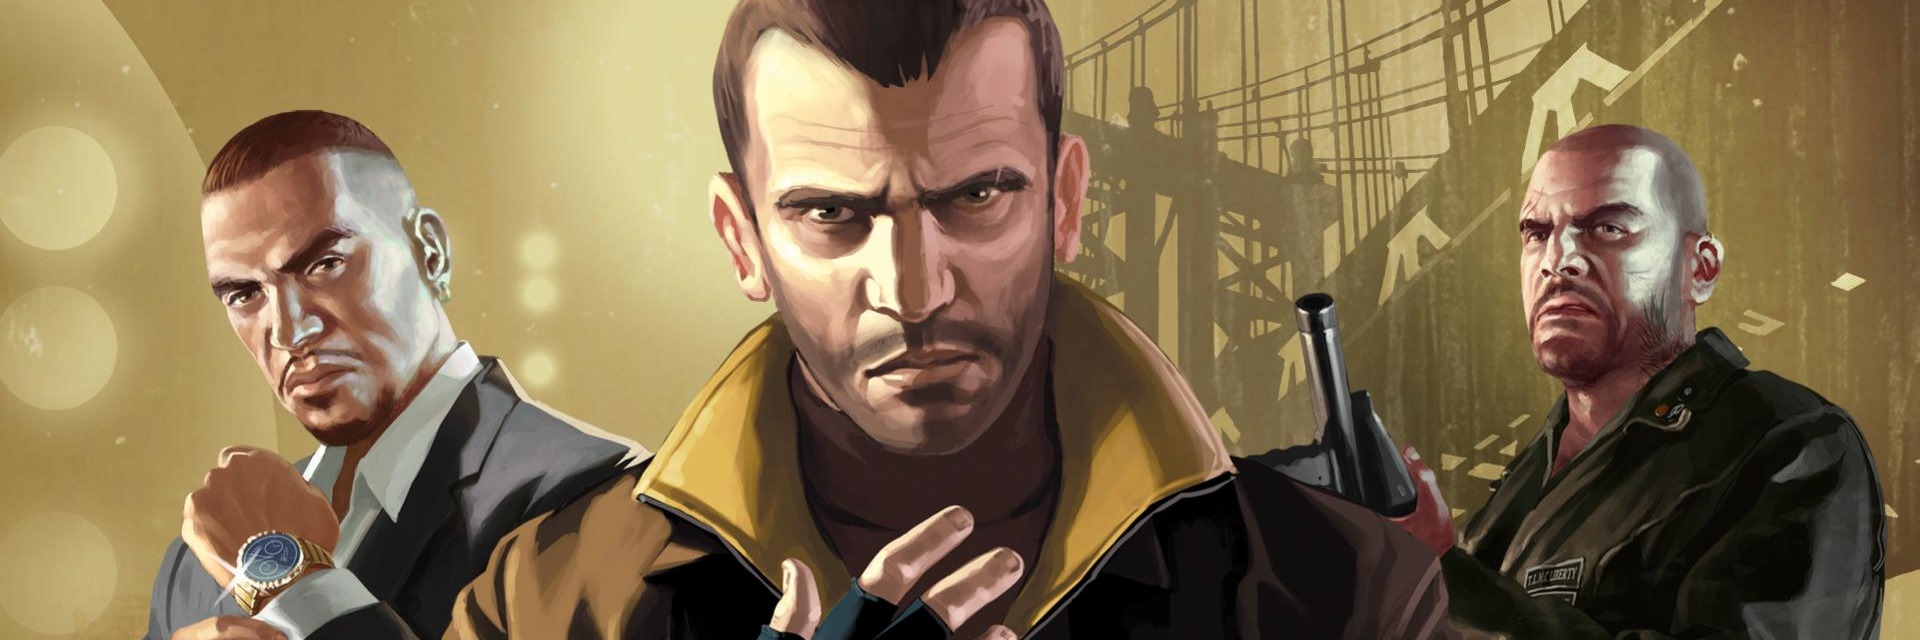 Grand theft auto iv characters